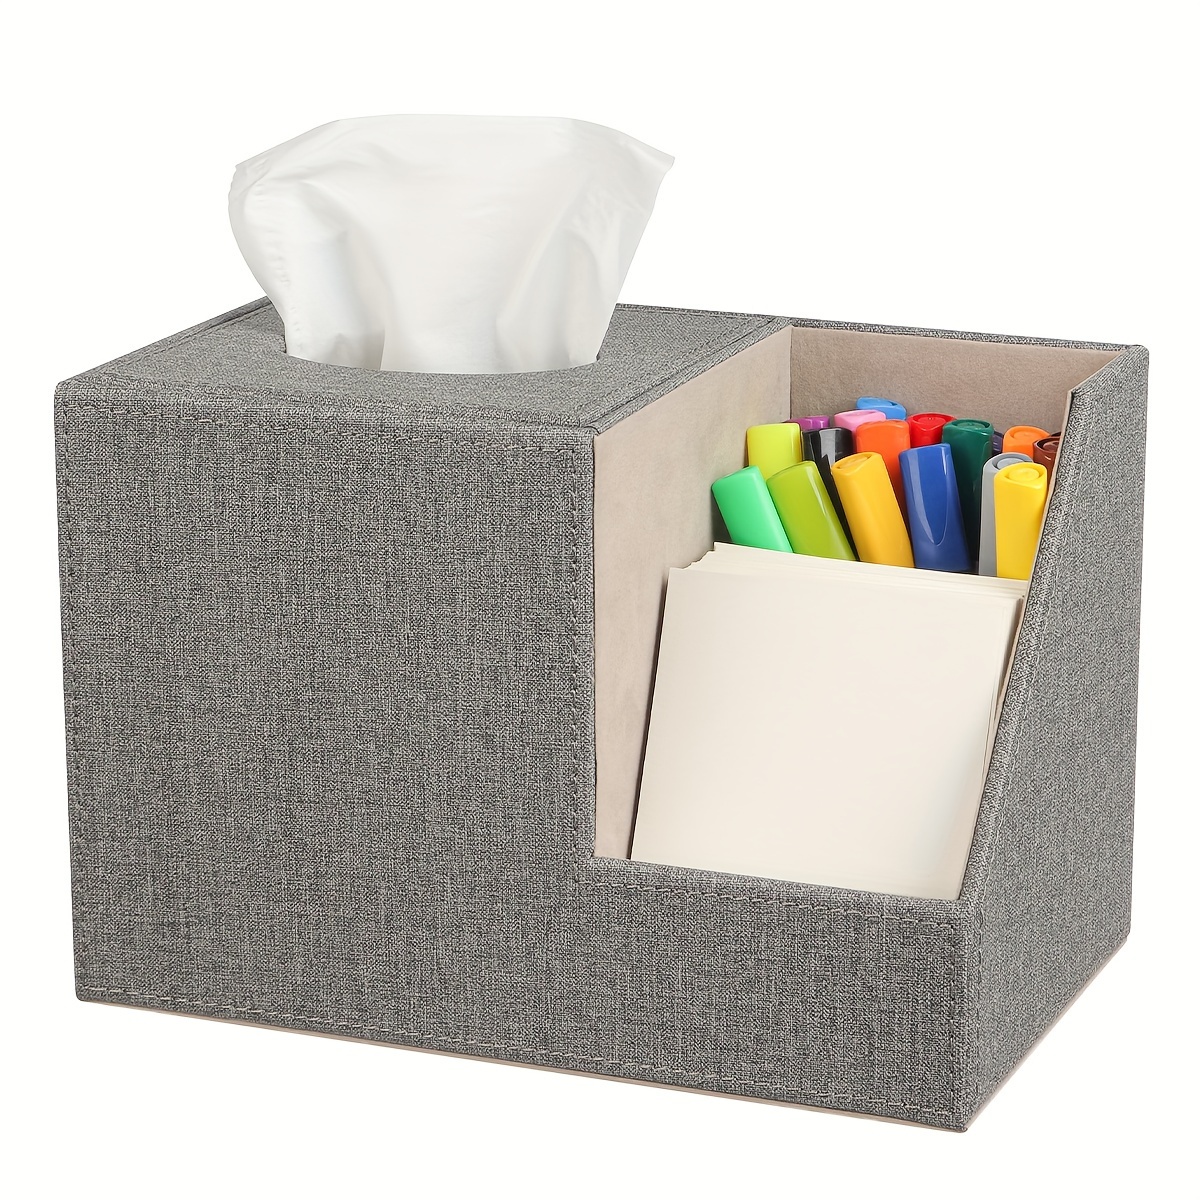 

Square Tissue Box Cover Organizer, Pu Leather Cube Tissue Box Holder With 2-compartment Storage Box, Tissue And Remote Control Holder, Decorative Tissue Box Bedroom Nightstand Office Tabletop, Grey